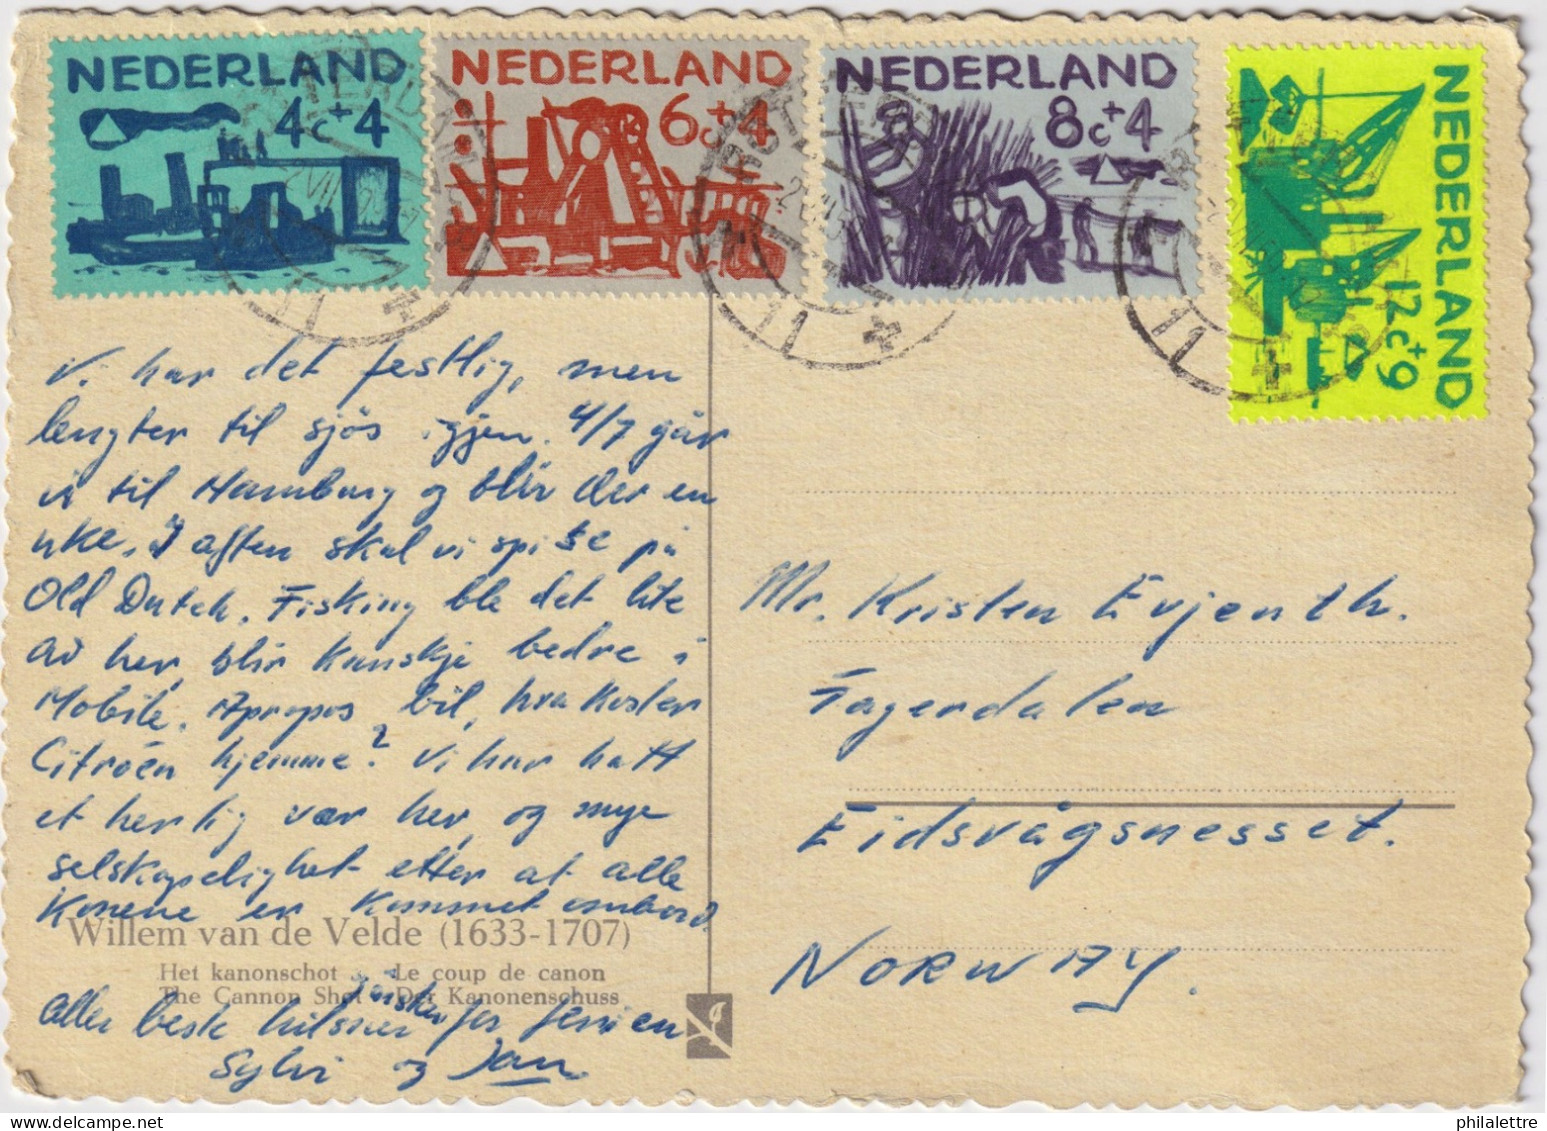 PAYS-BAS / THE NETHERLANDS - 1959 Mi.730, 731, 732 & 733 On Card From ROTTERDAM To EIDSVAG, MESSET, Norway - Lettres & Documents